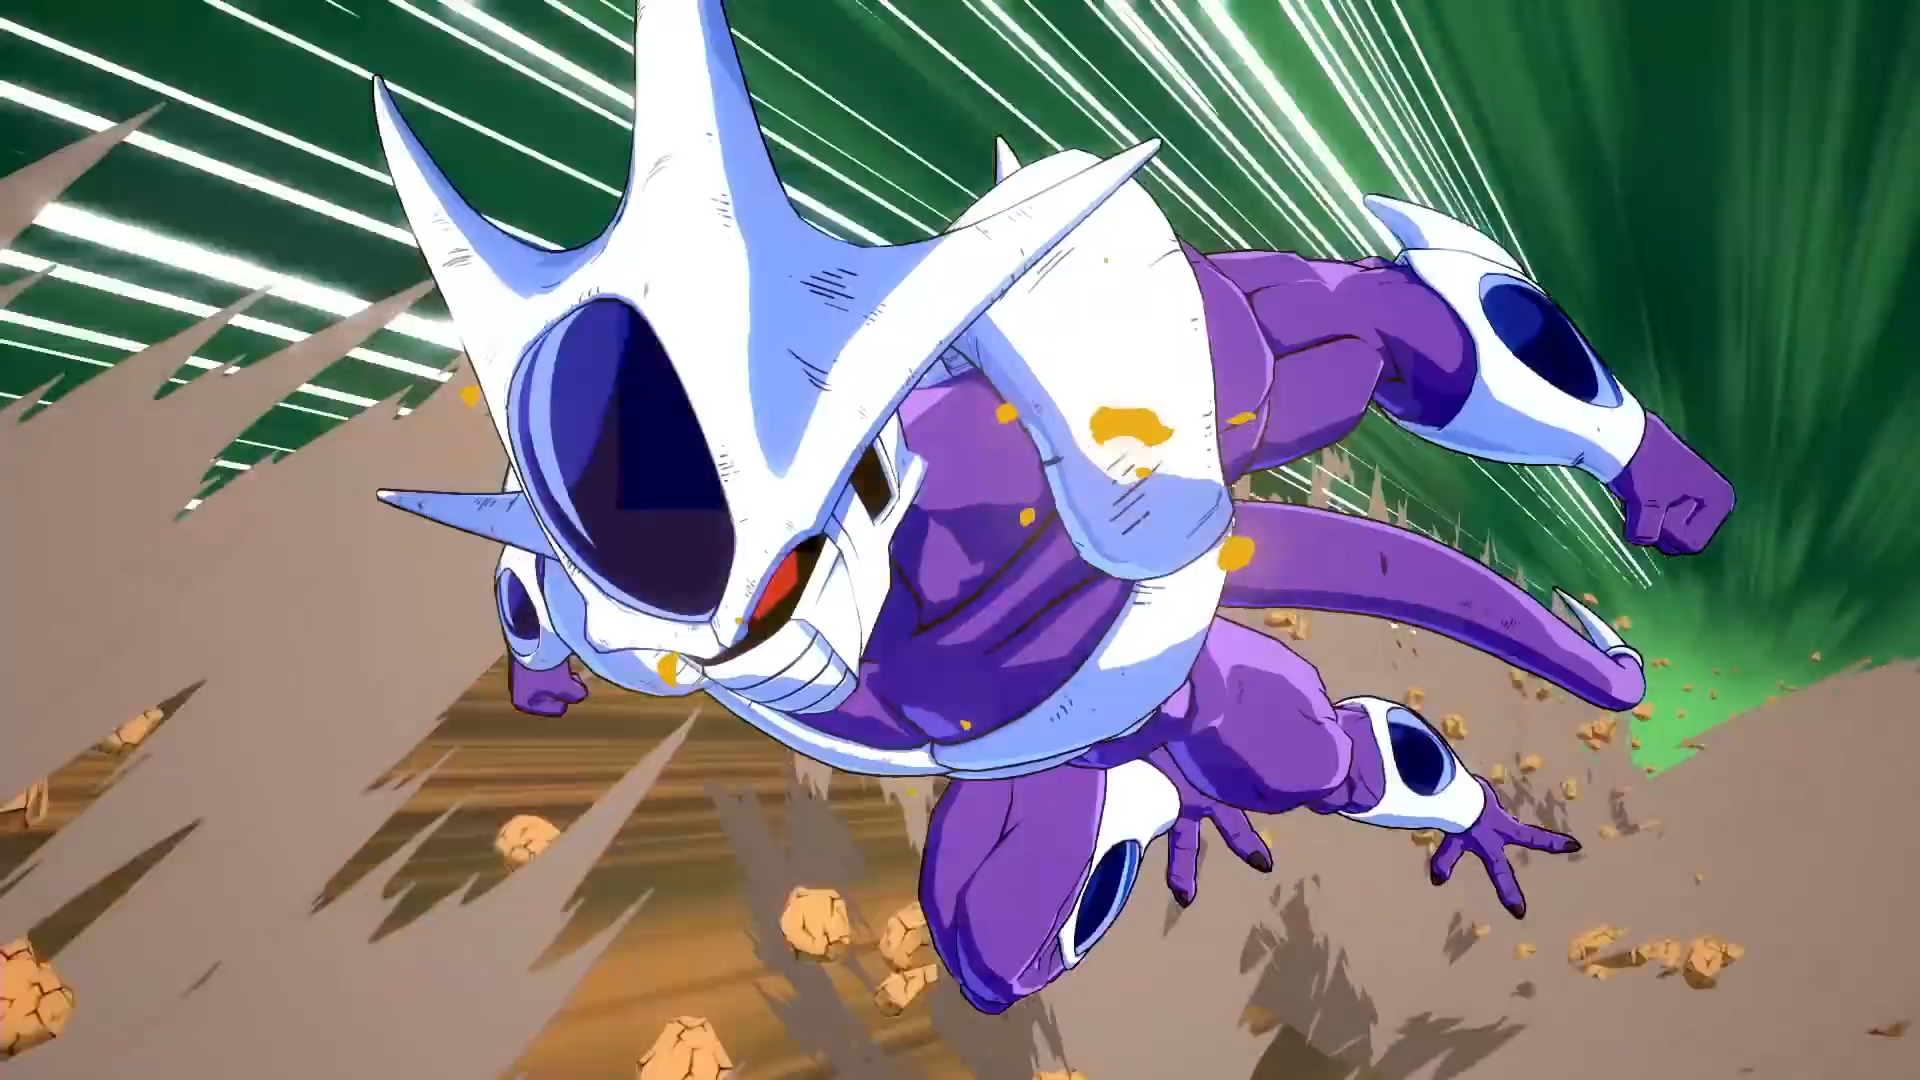 Consult Prelude Underline Dragon Ball FighterZ Announces New DLC Character, Cooler - GameSpot